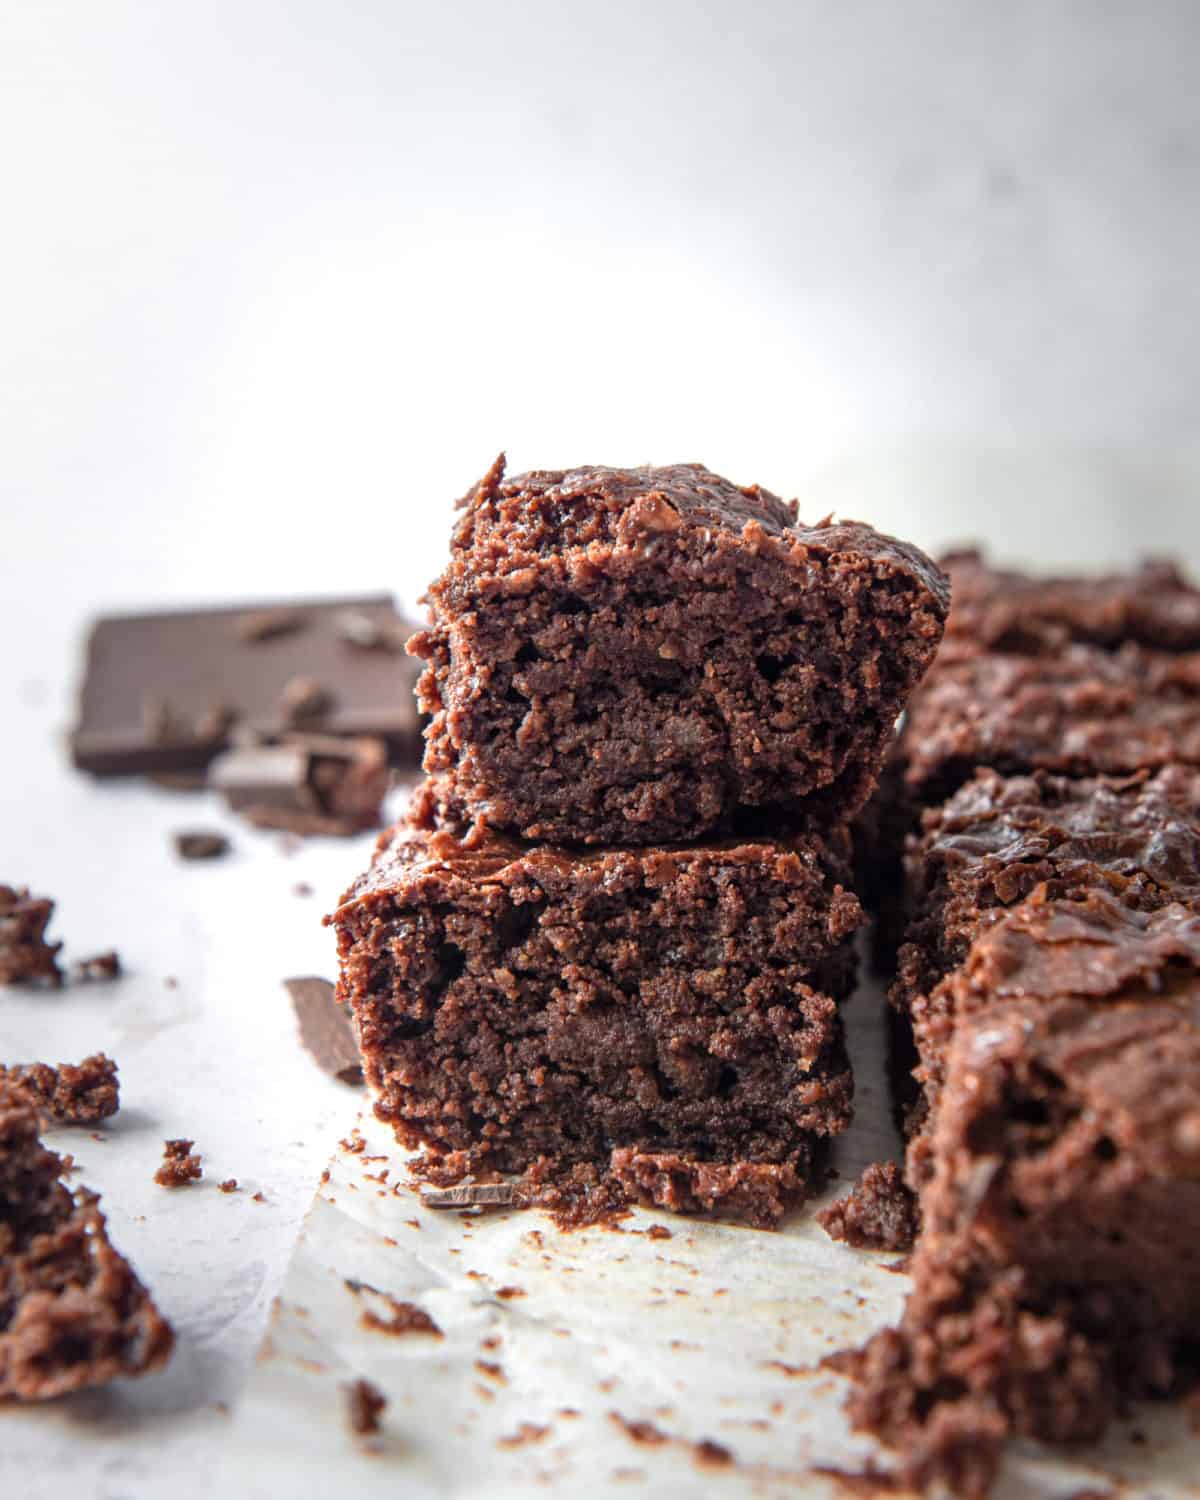 Gooey brownies on parchment paper with lots of crumbs.